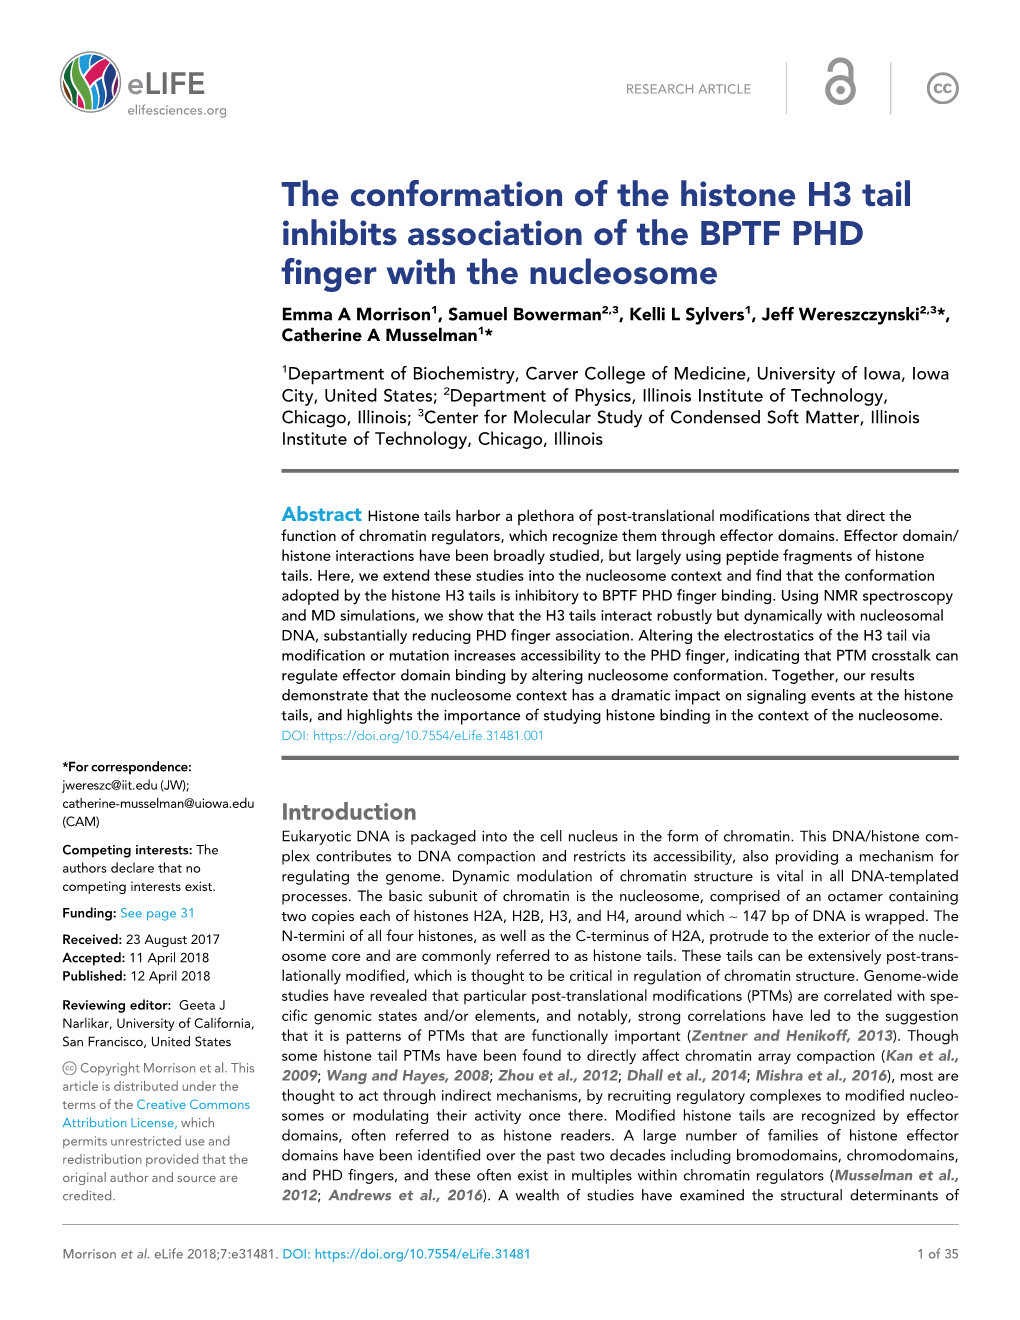 The Conformation of the Histone H3 Tail Inhibits Association of the BPTF